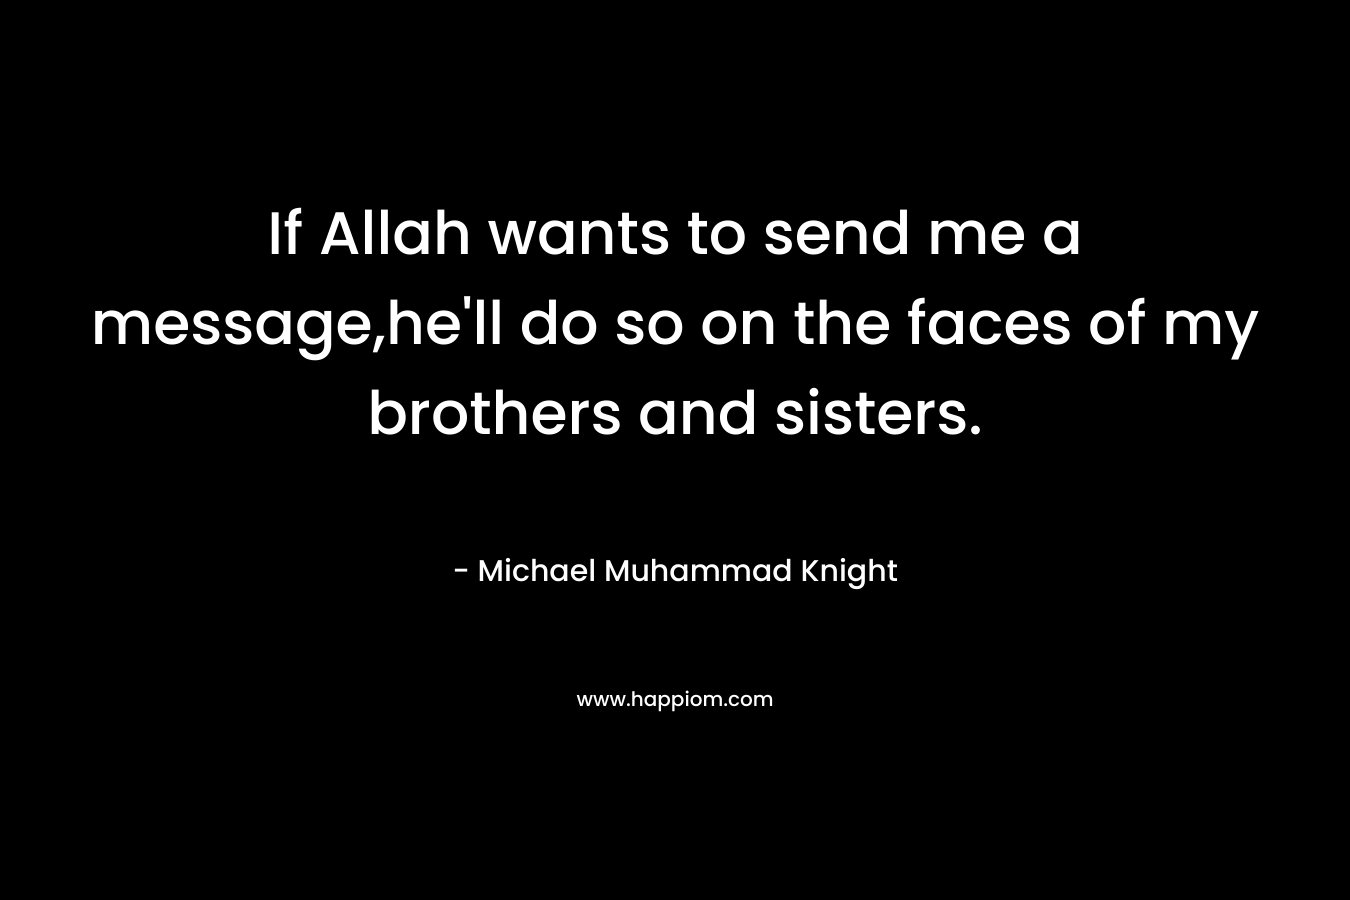 If Allah wants to send me a message,he’ll do so on the faces of my brothers and sisters. – Michael Muhammad Knight